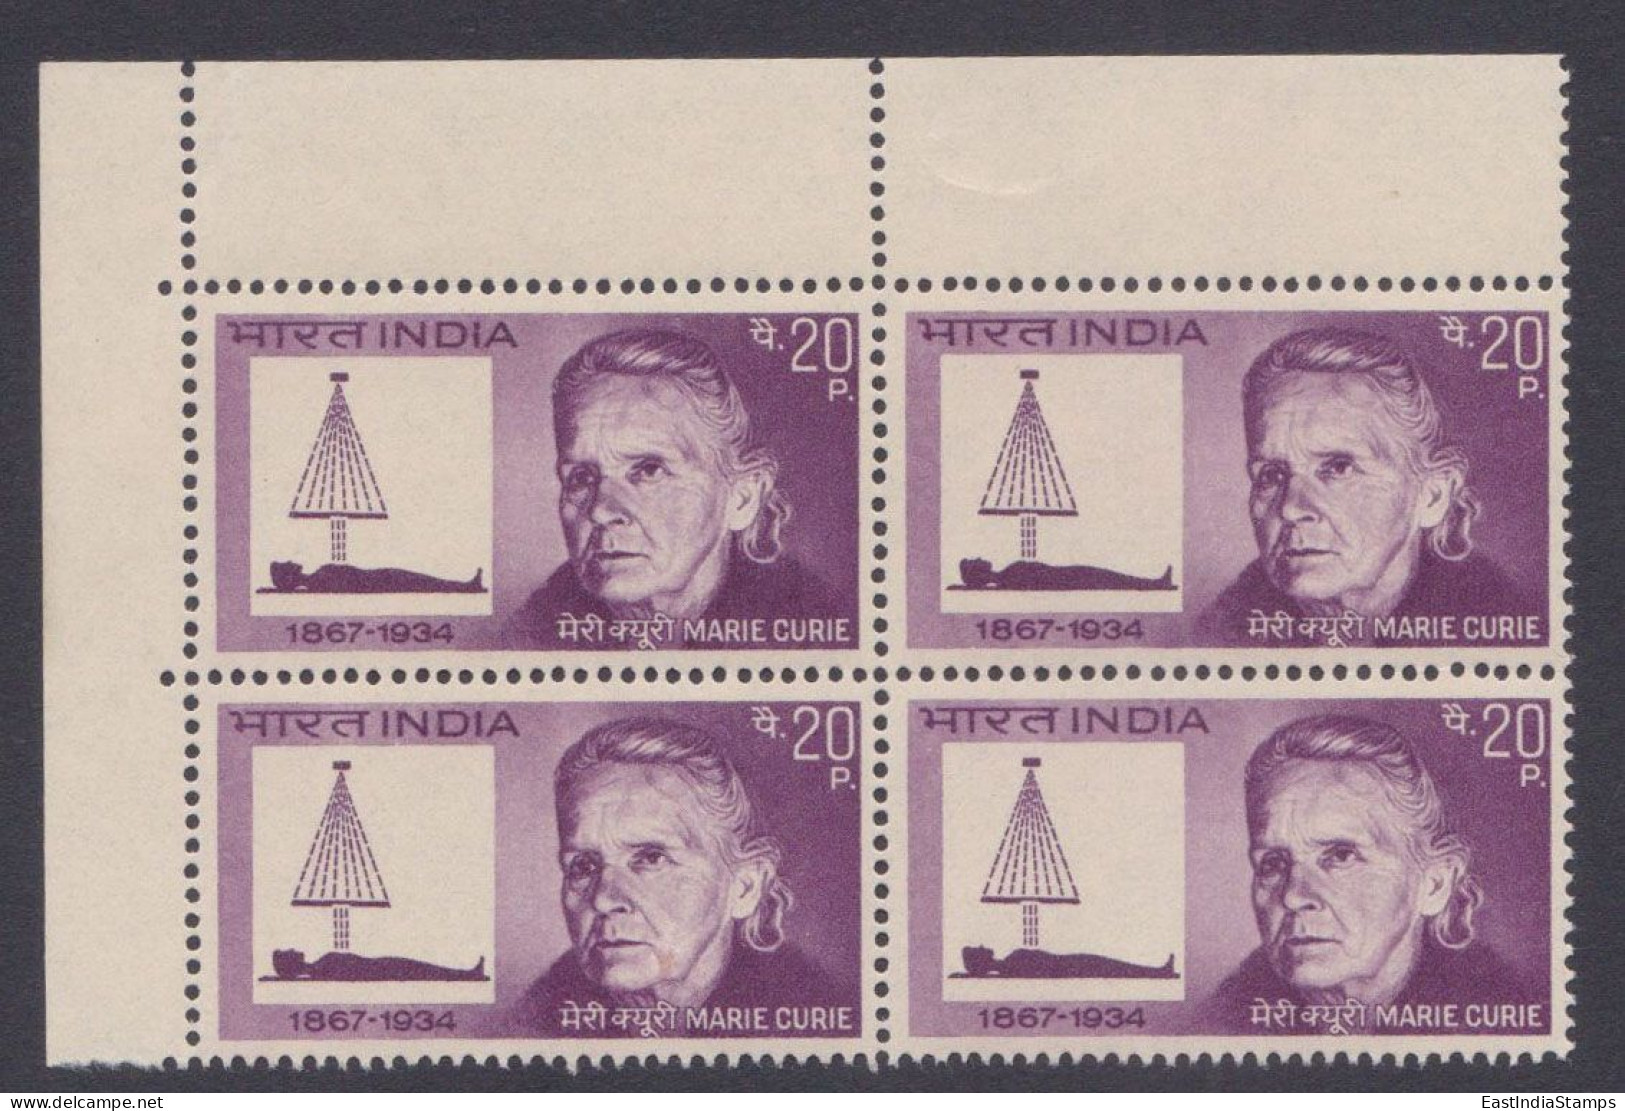 Inde India 1968 MNH Marie Curie, Polish French Chemist, Physicist, Nobel Prize Winner, Science, Scientist, Physics Block - Unused Stamps